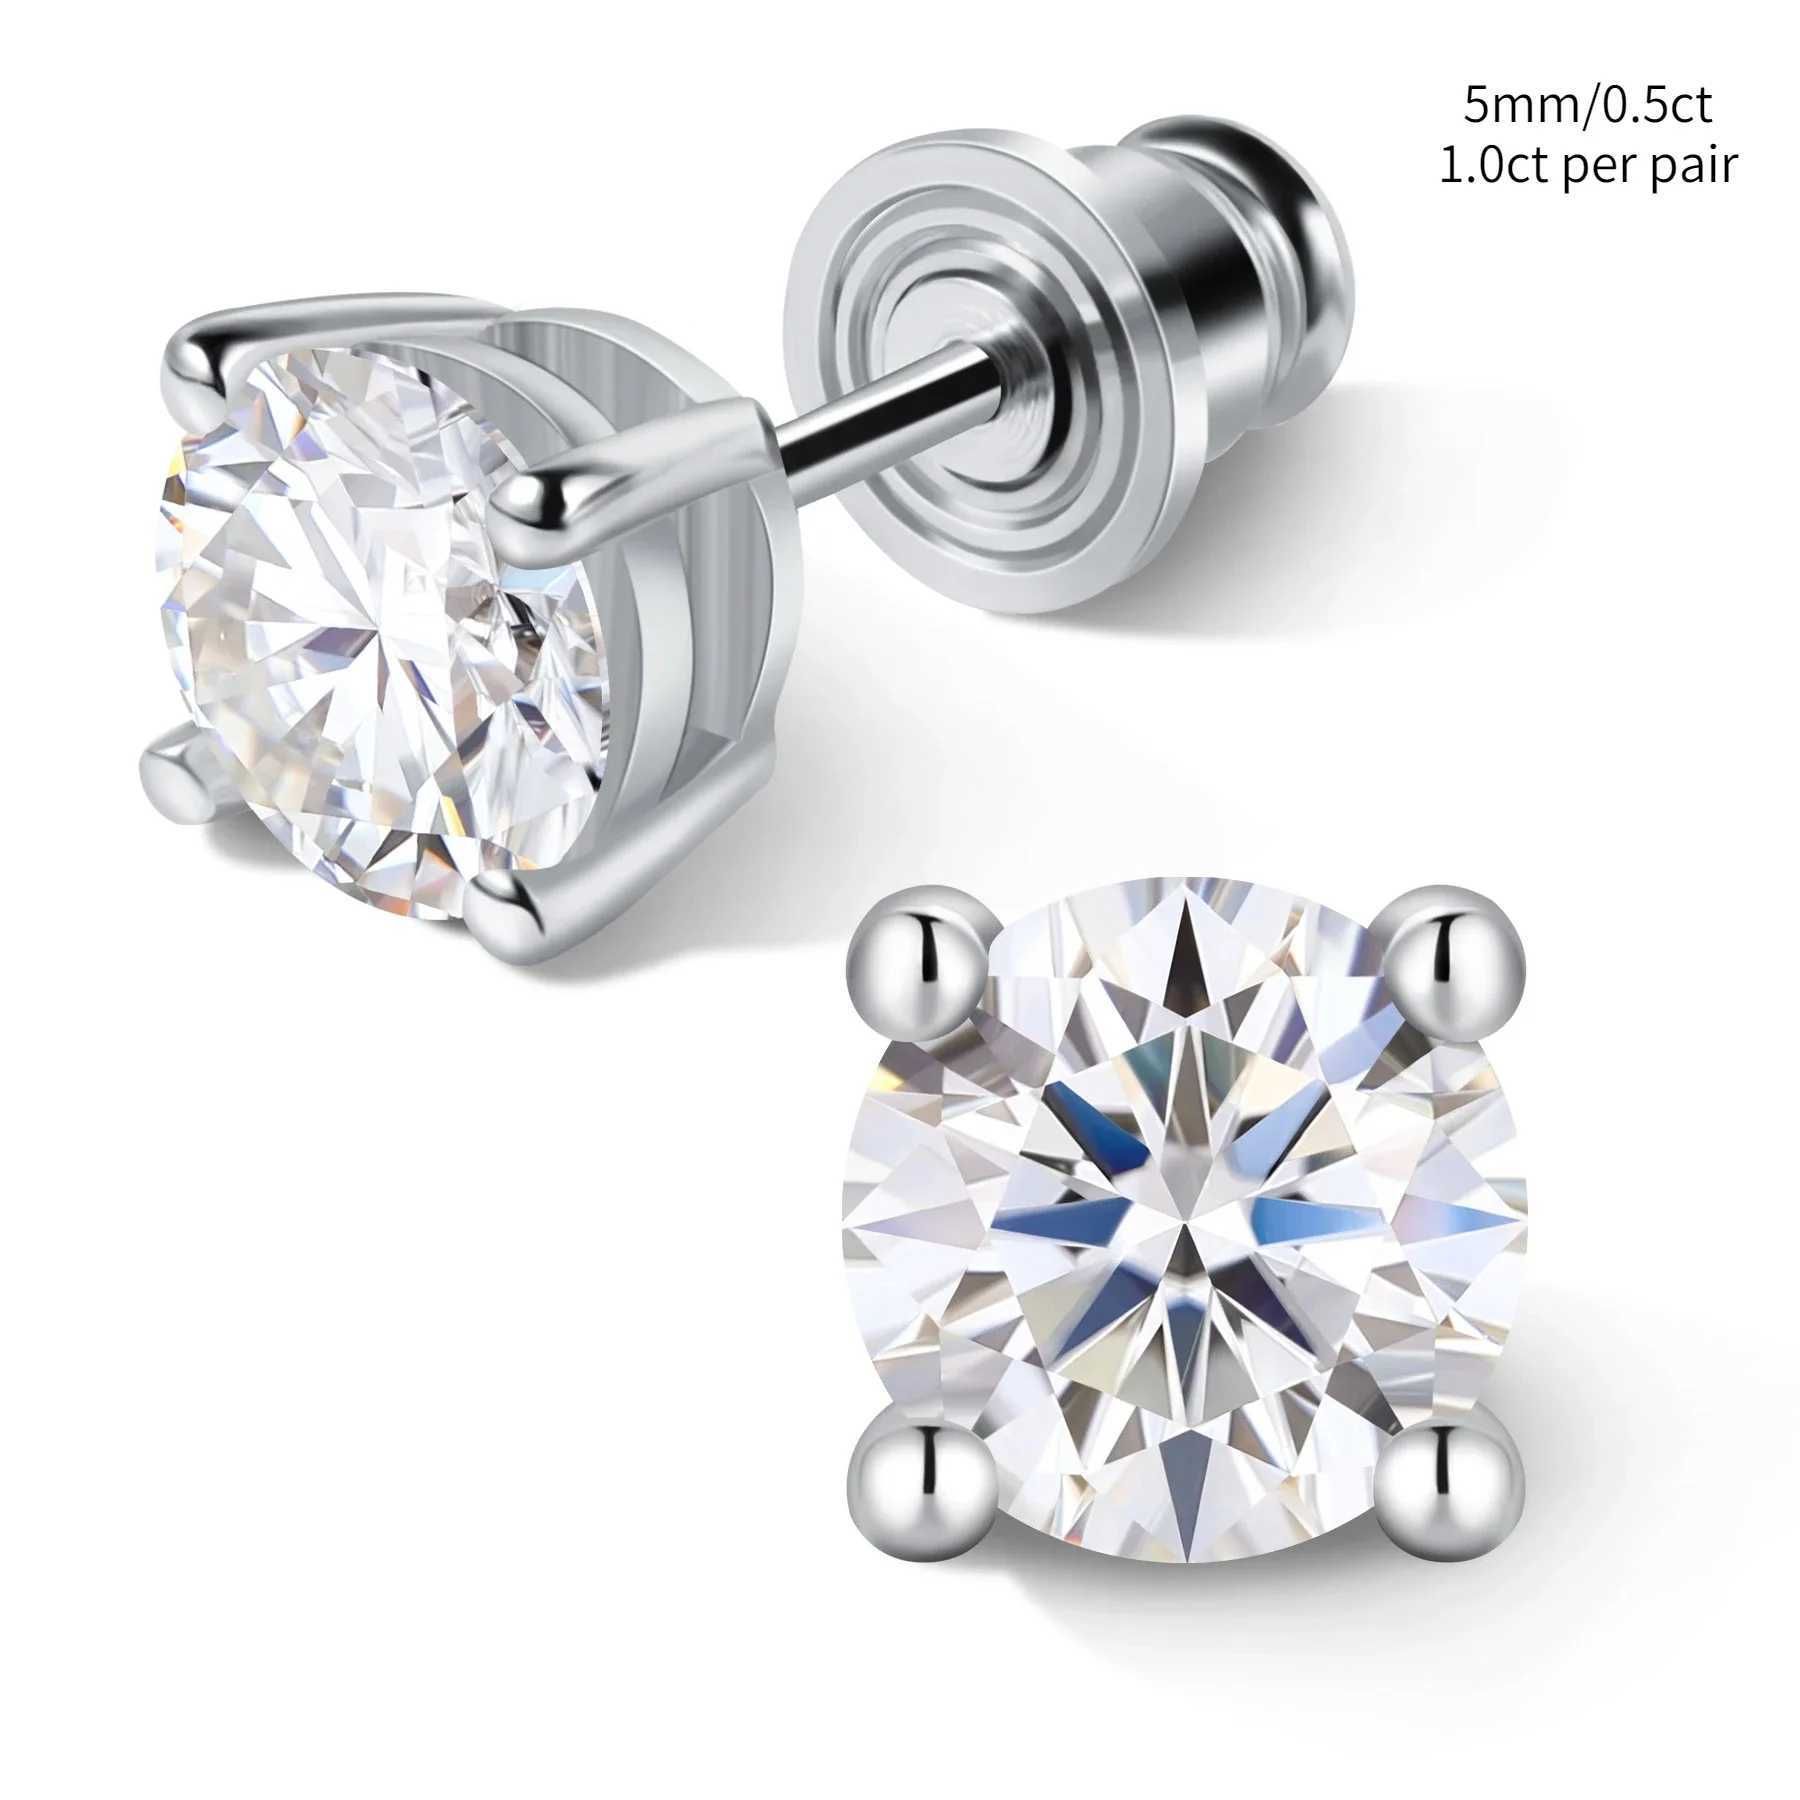 1.0ct Per Pair 5mm-with Certificated